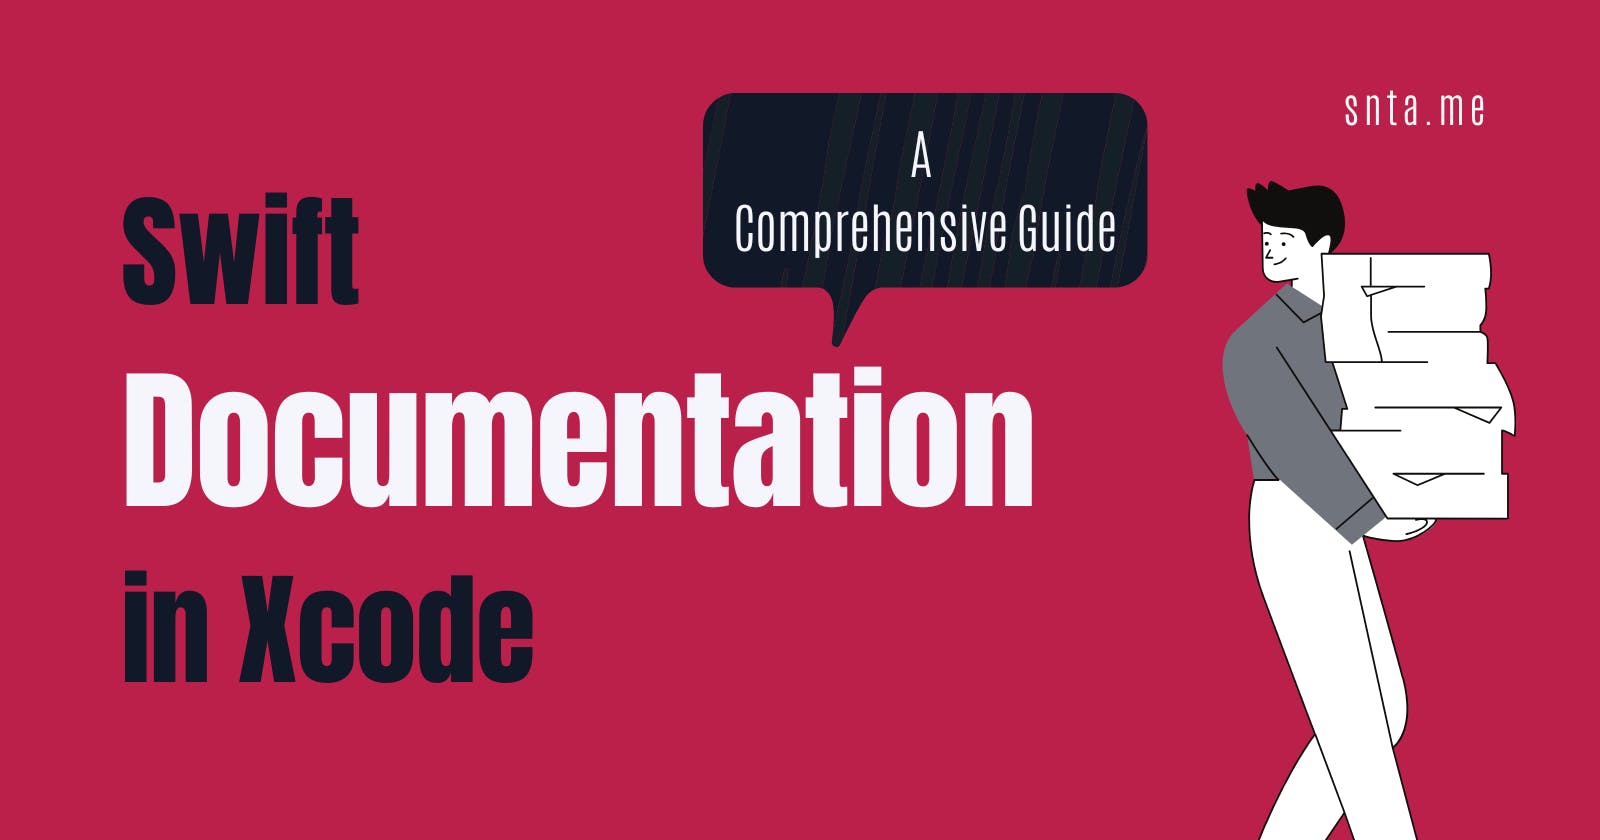 Swift Documentation in Xcode: A Comprehensive Guide